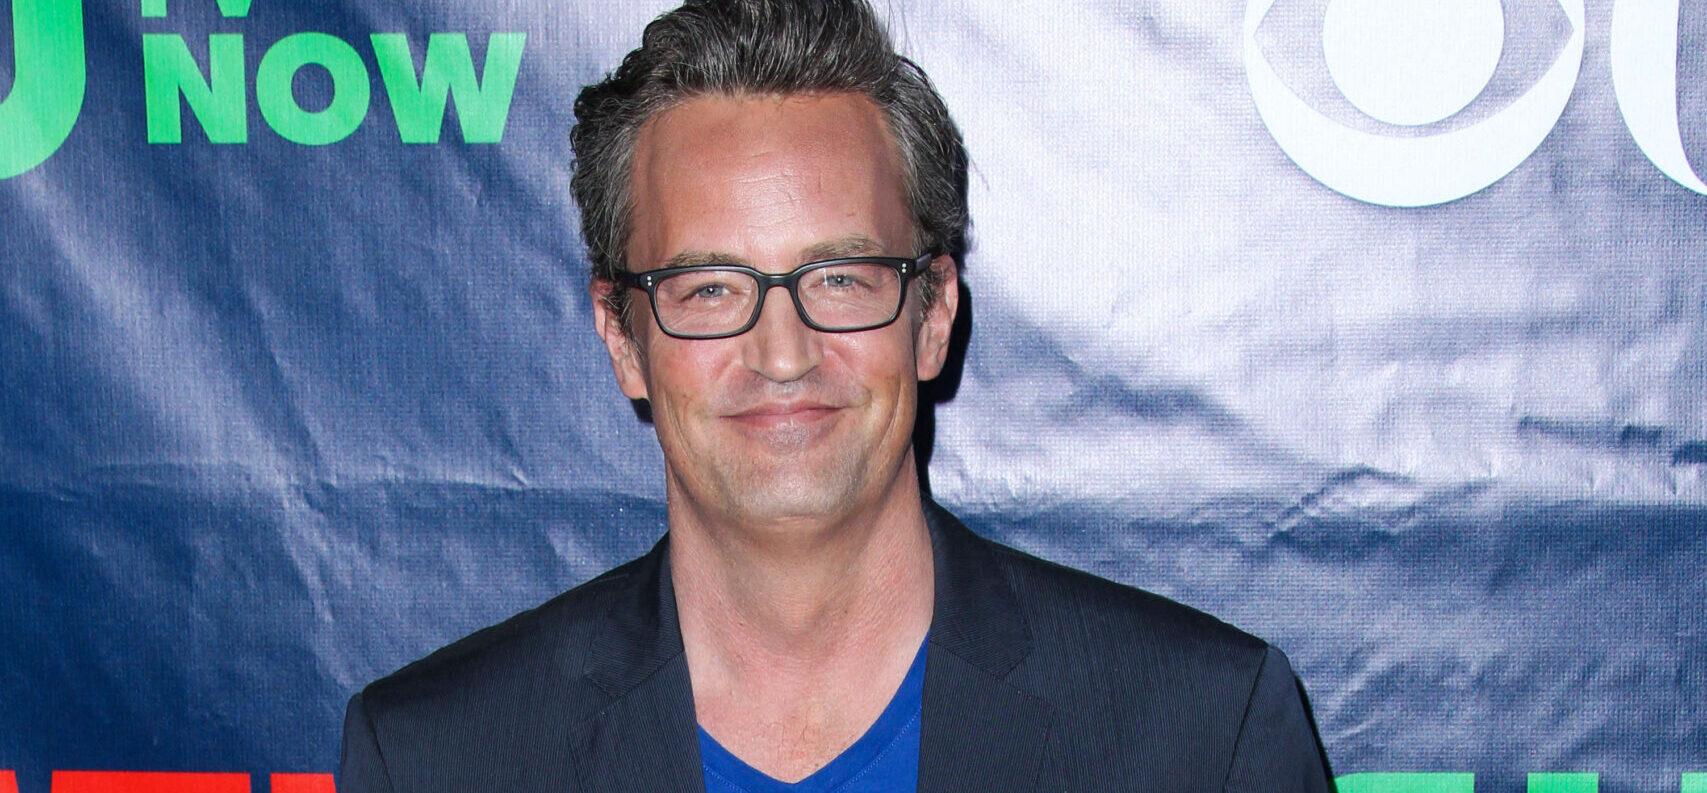 Matthew Perry's Manner Of Death Ruled An 'Accident' 2 Months After His Death